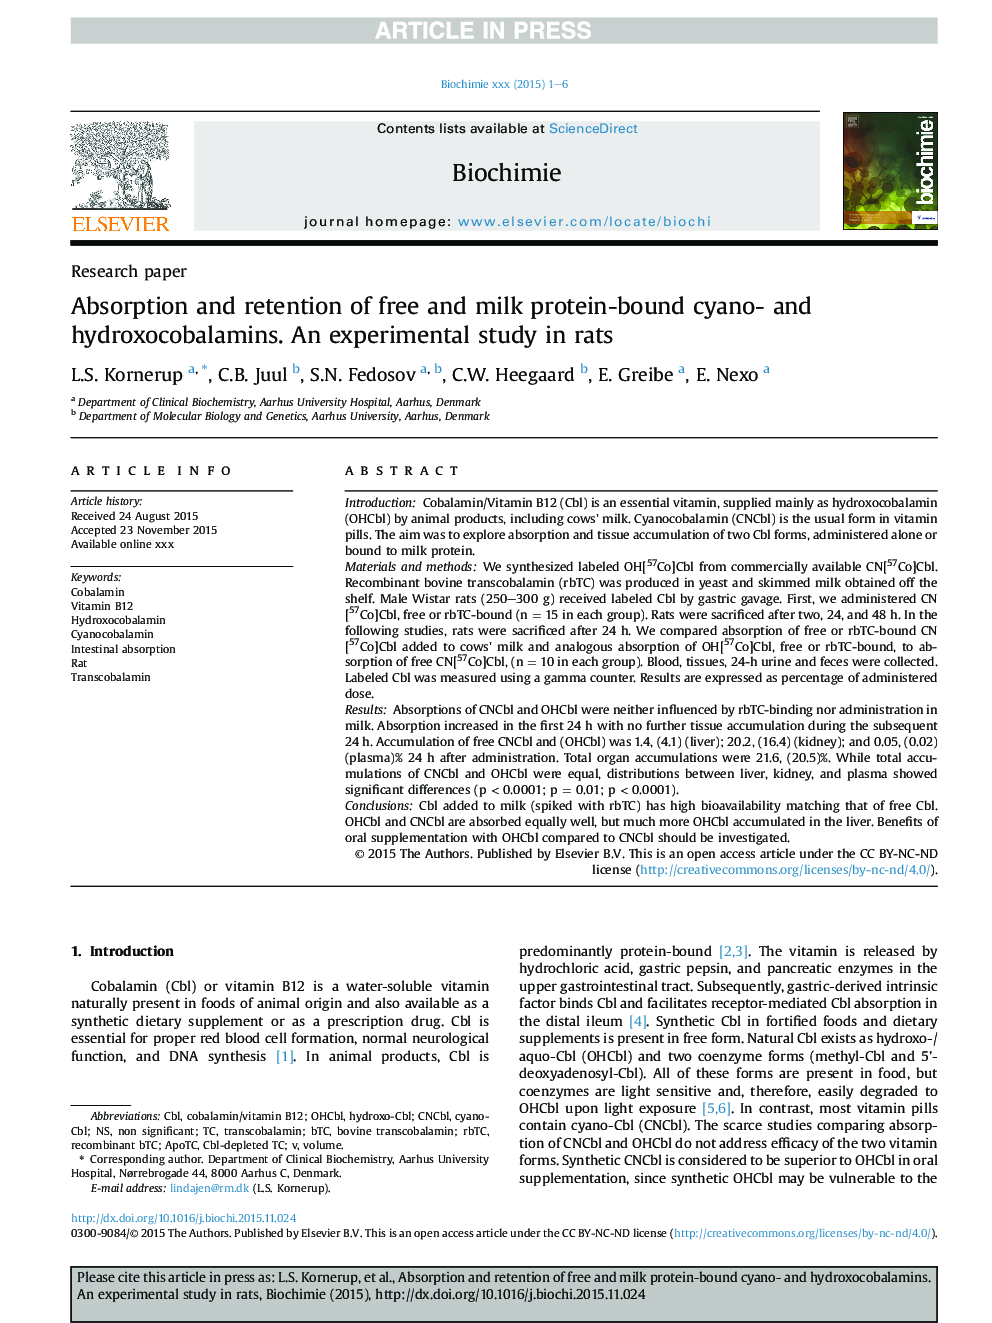 Absorption and retention of free and milk protein-bound cyano- and hydroxocobalamins. An experimental study in rats